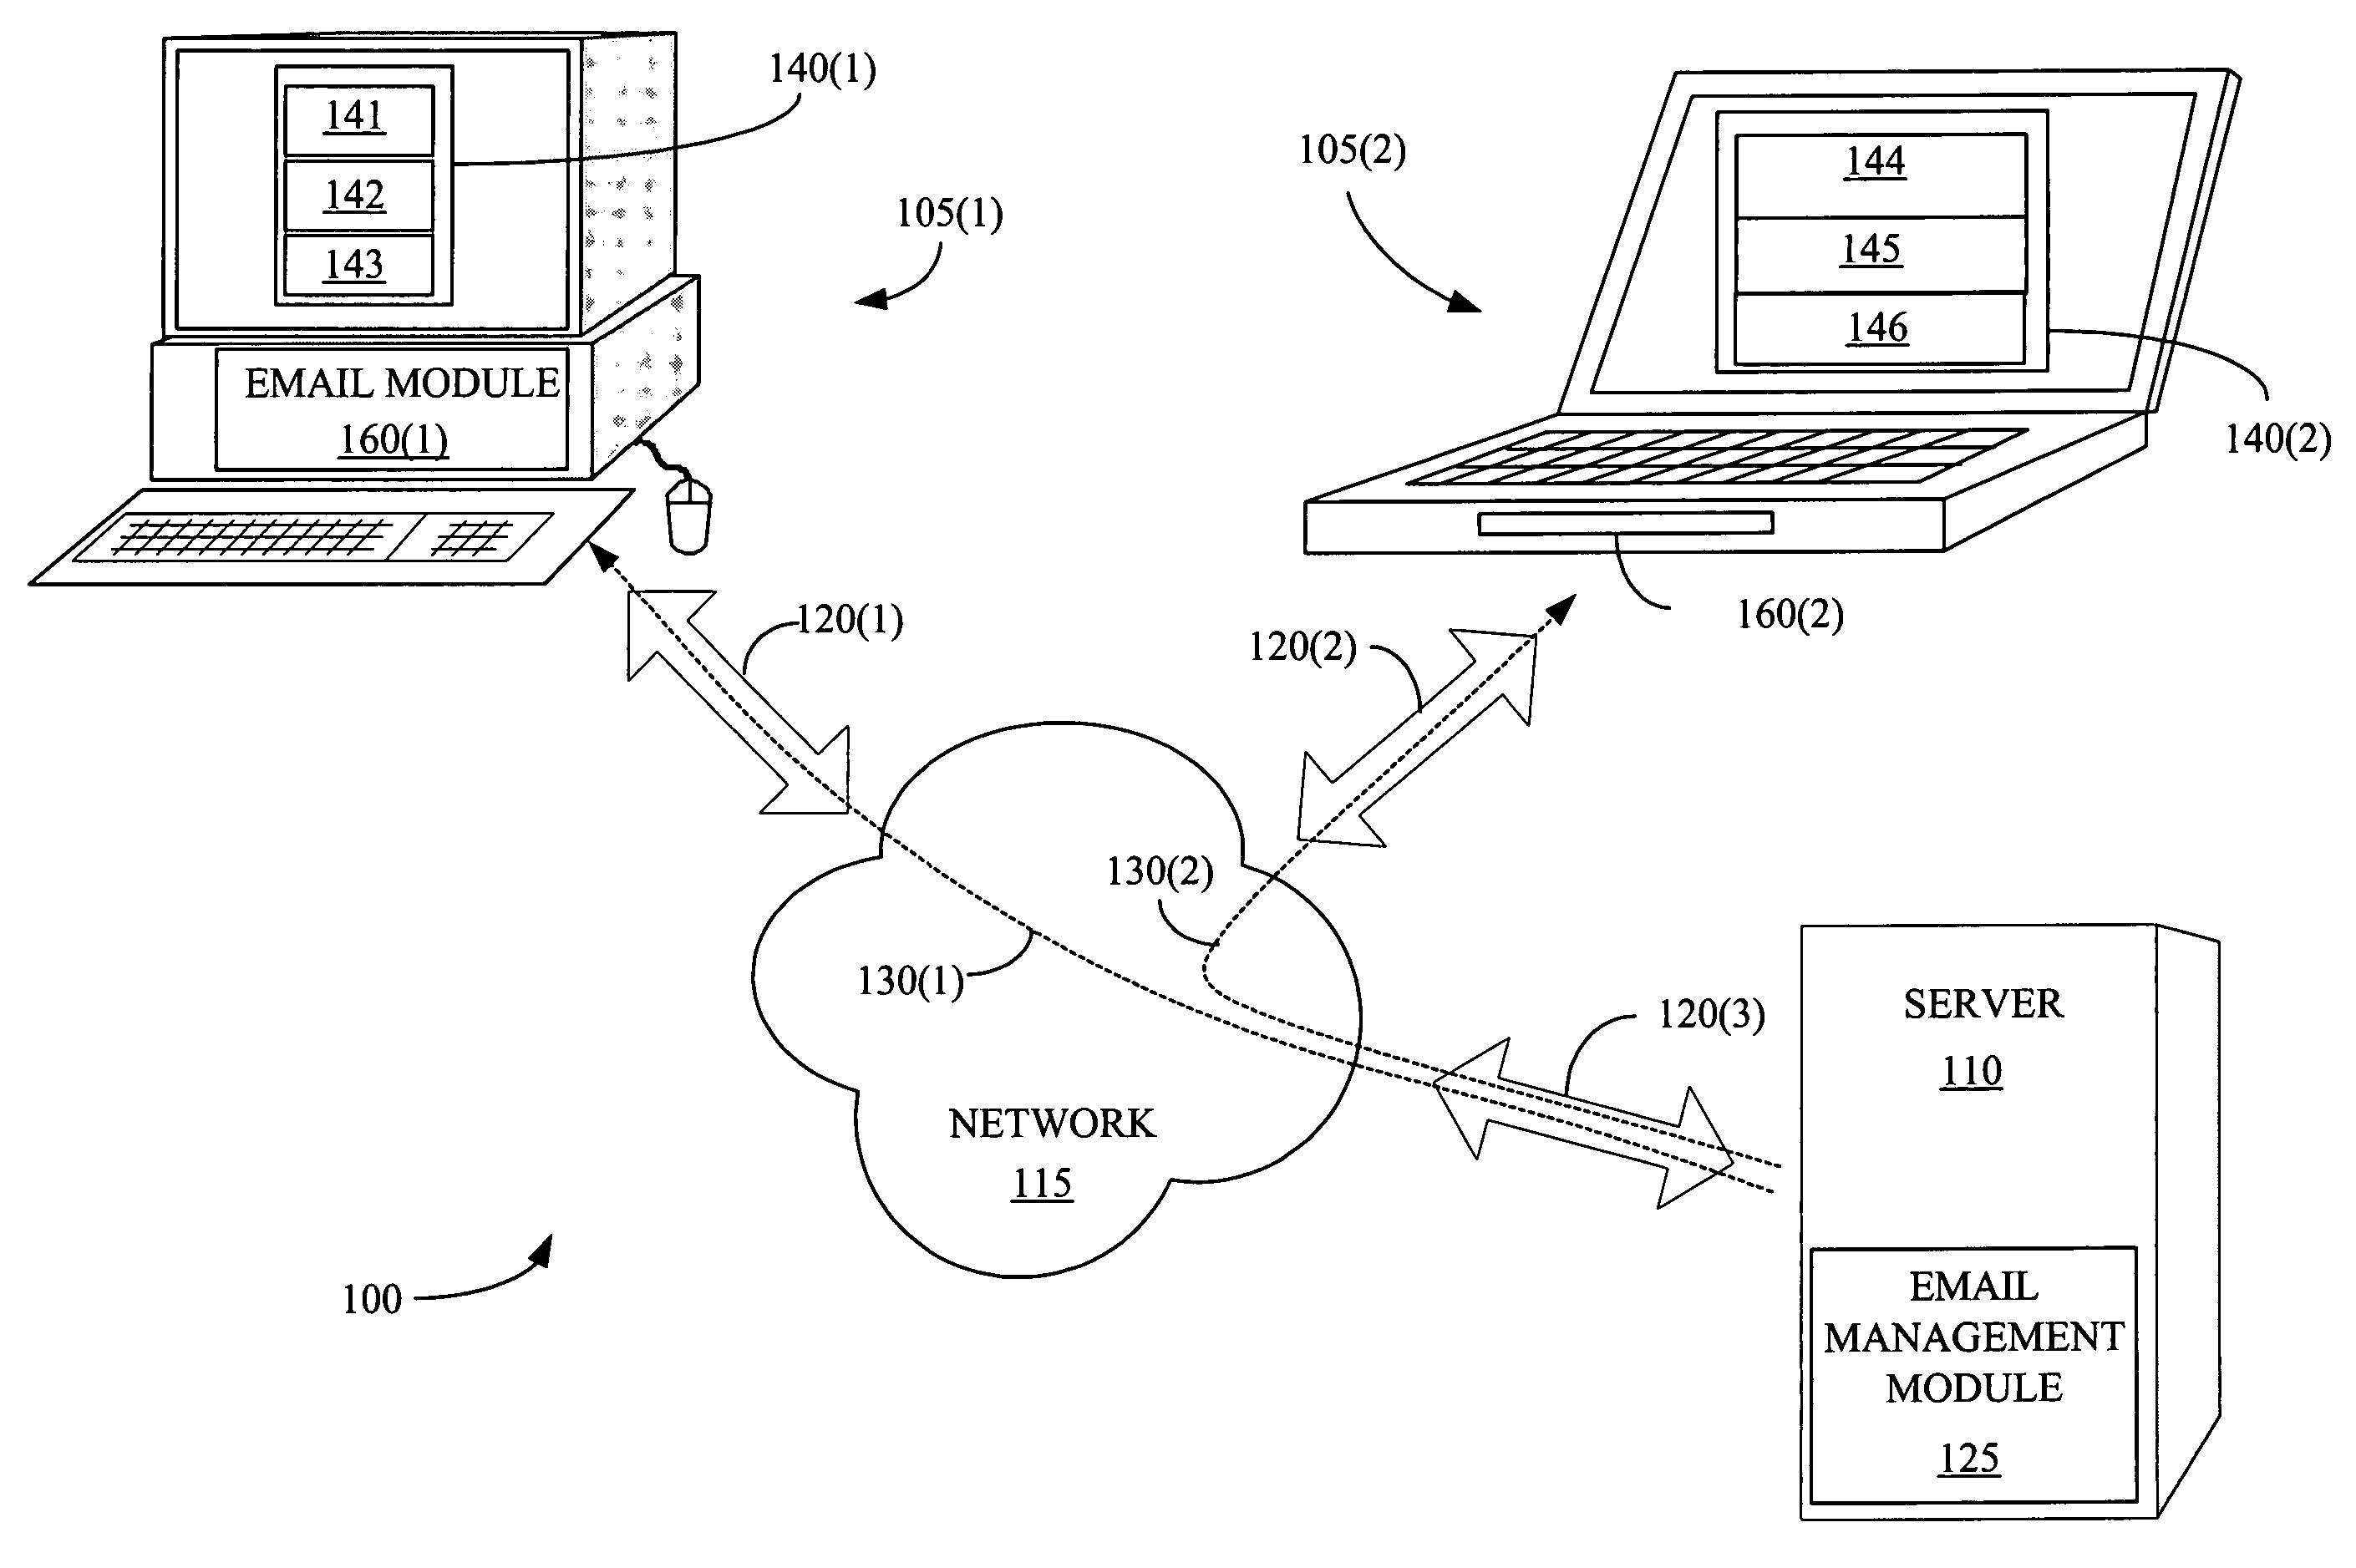 Providing a portion of an electronic mail message based upon a transfer rate, a message size, and a file format